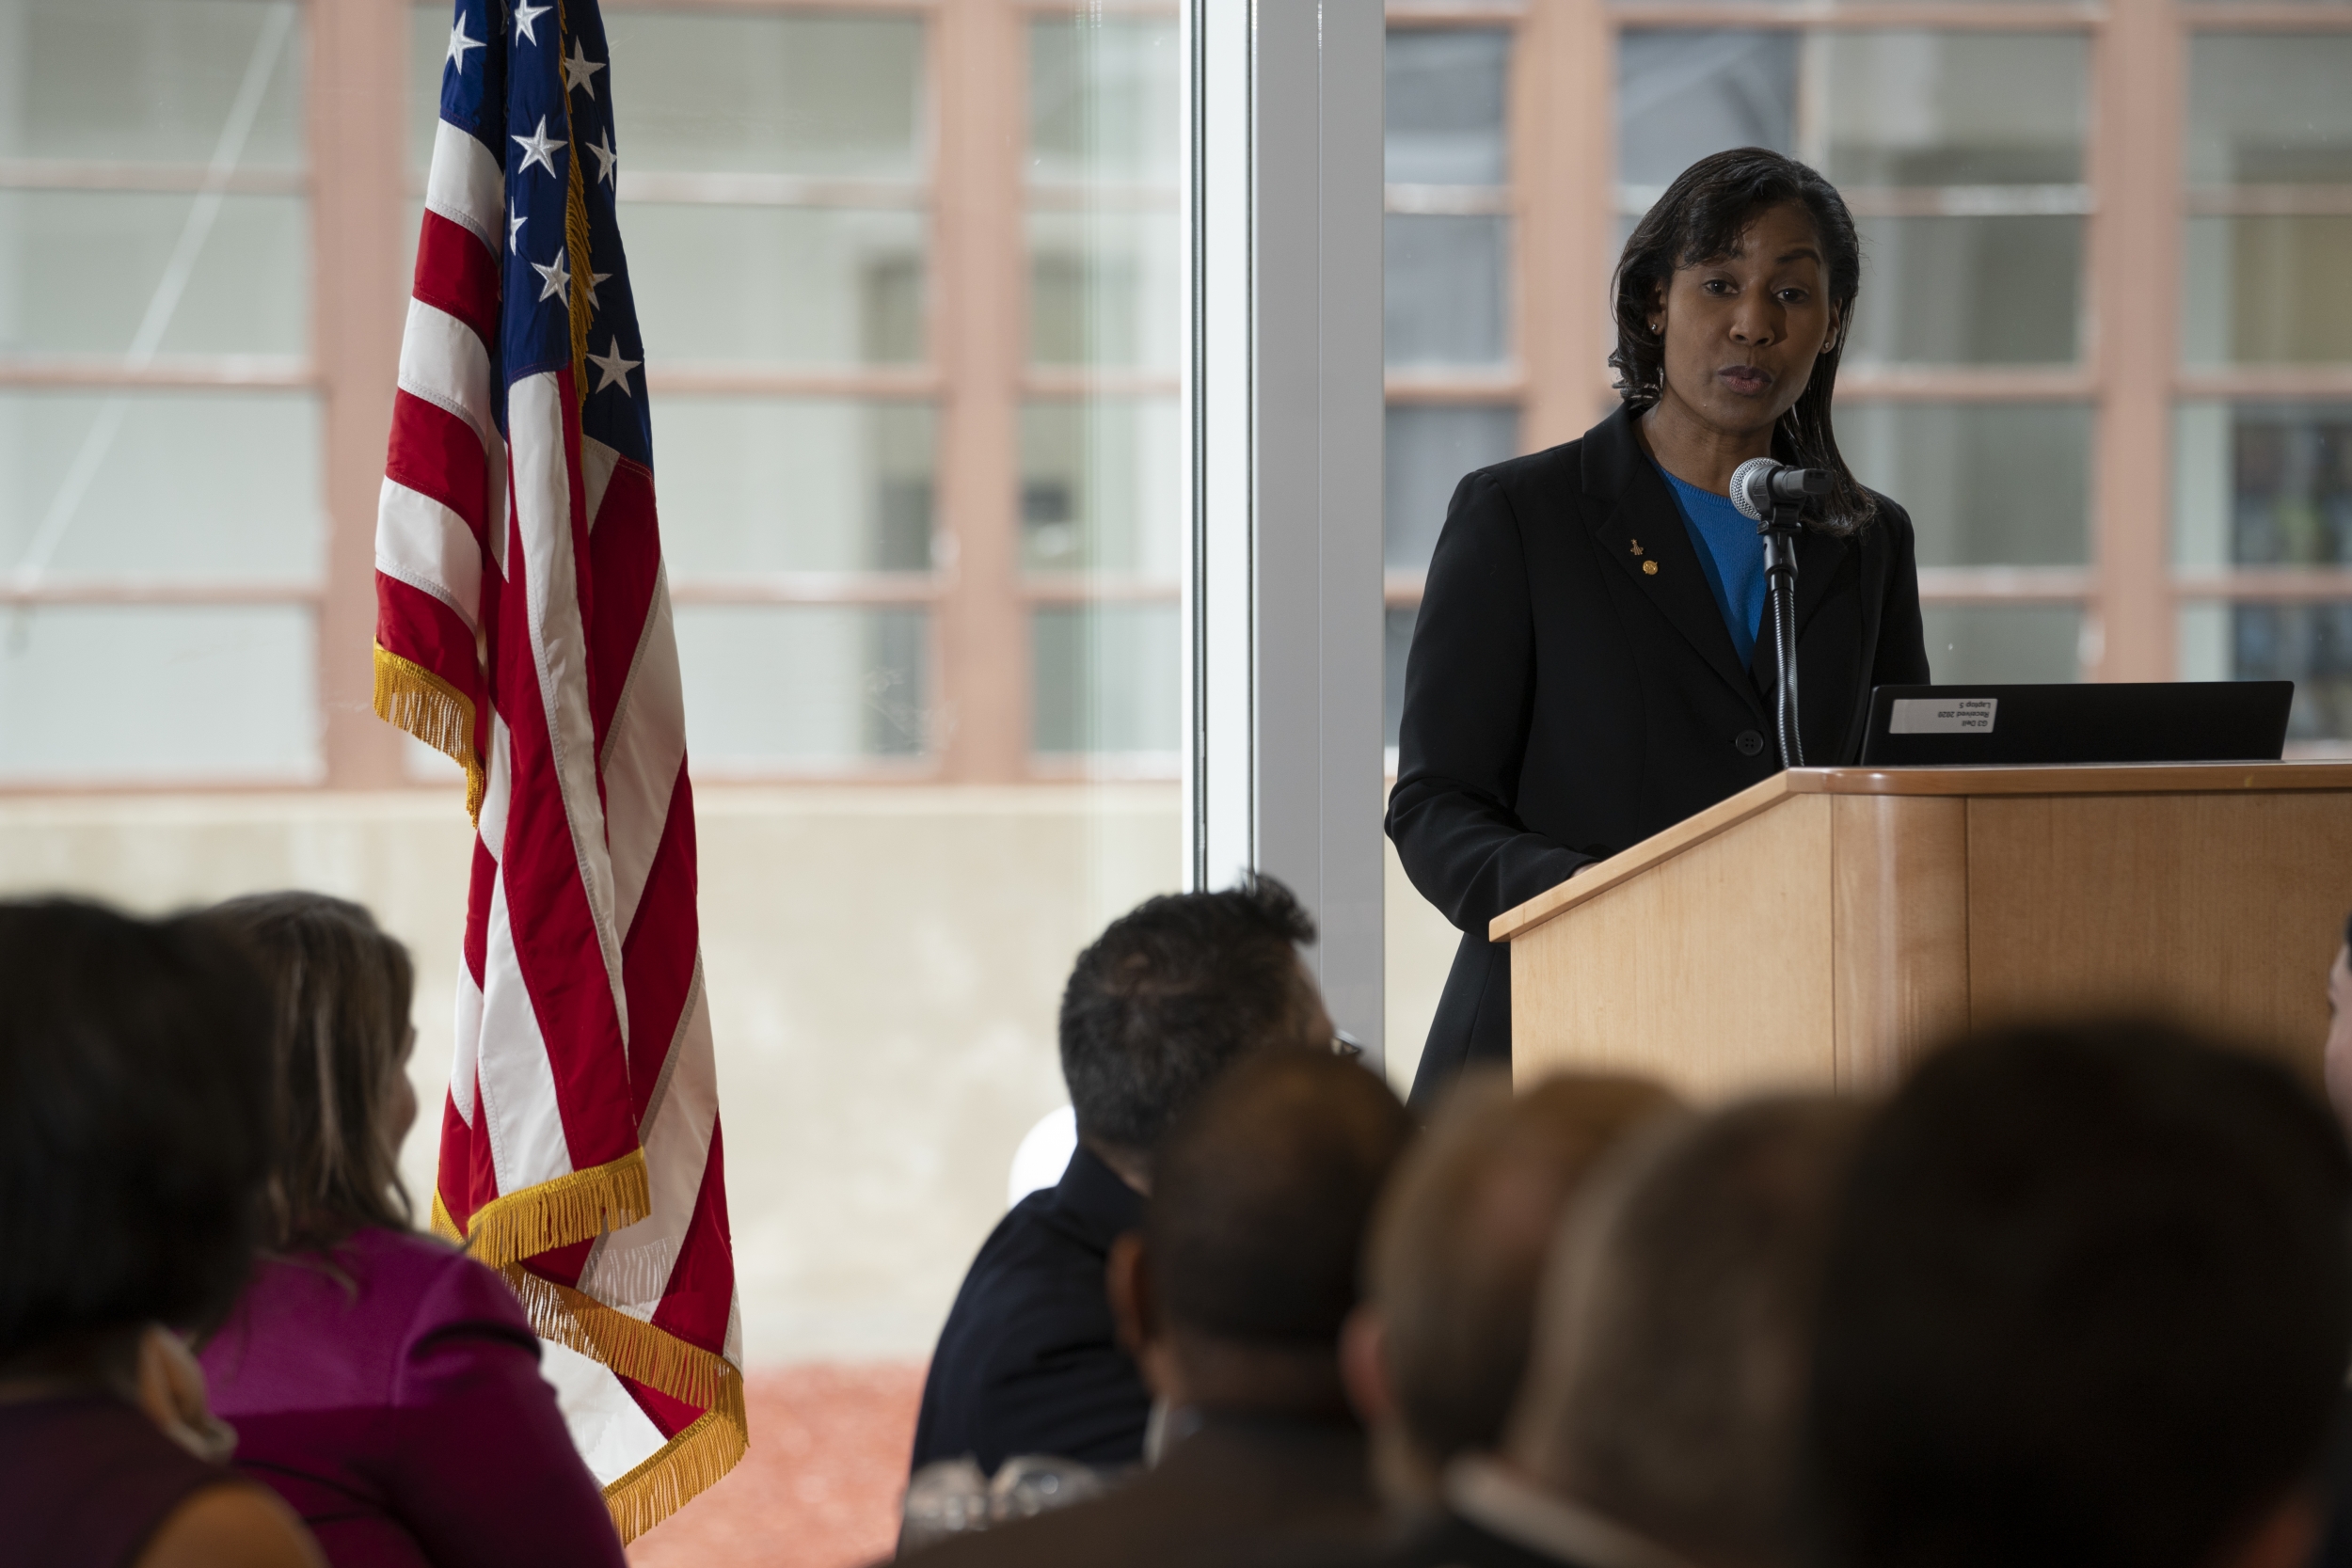 a photo of a woman standing and speaking at a podium next to an American flag